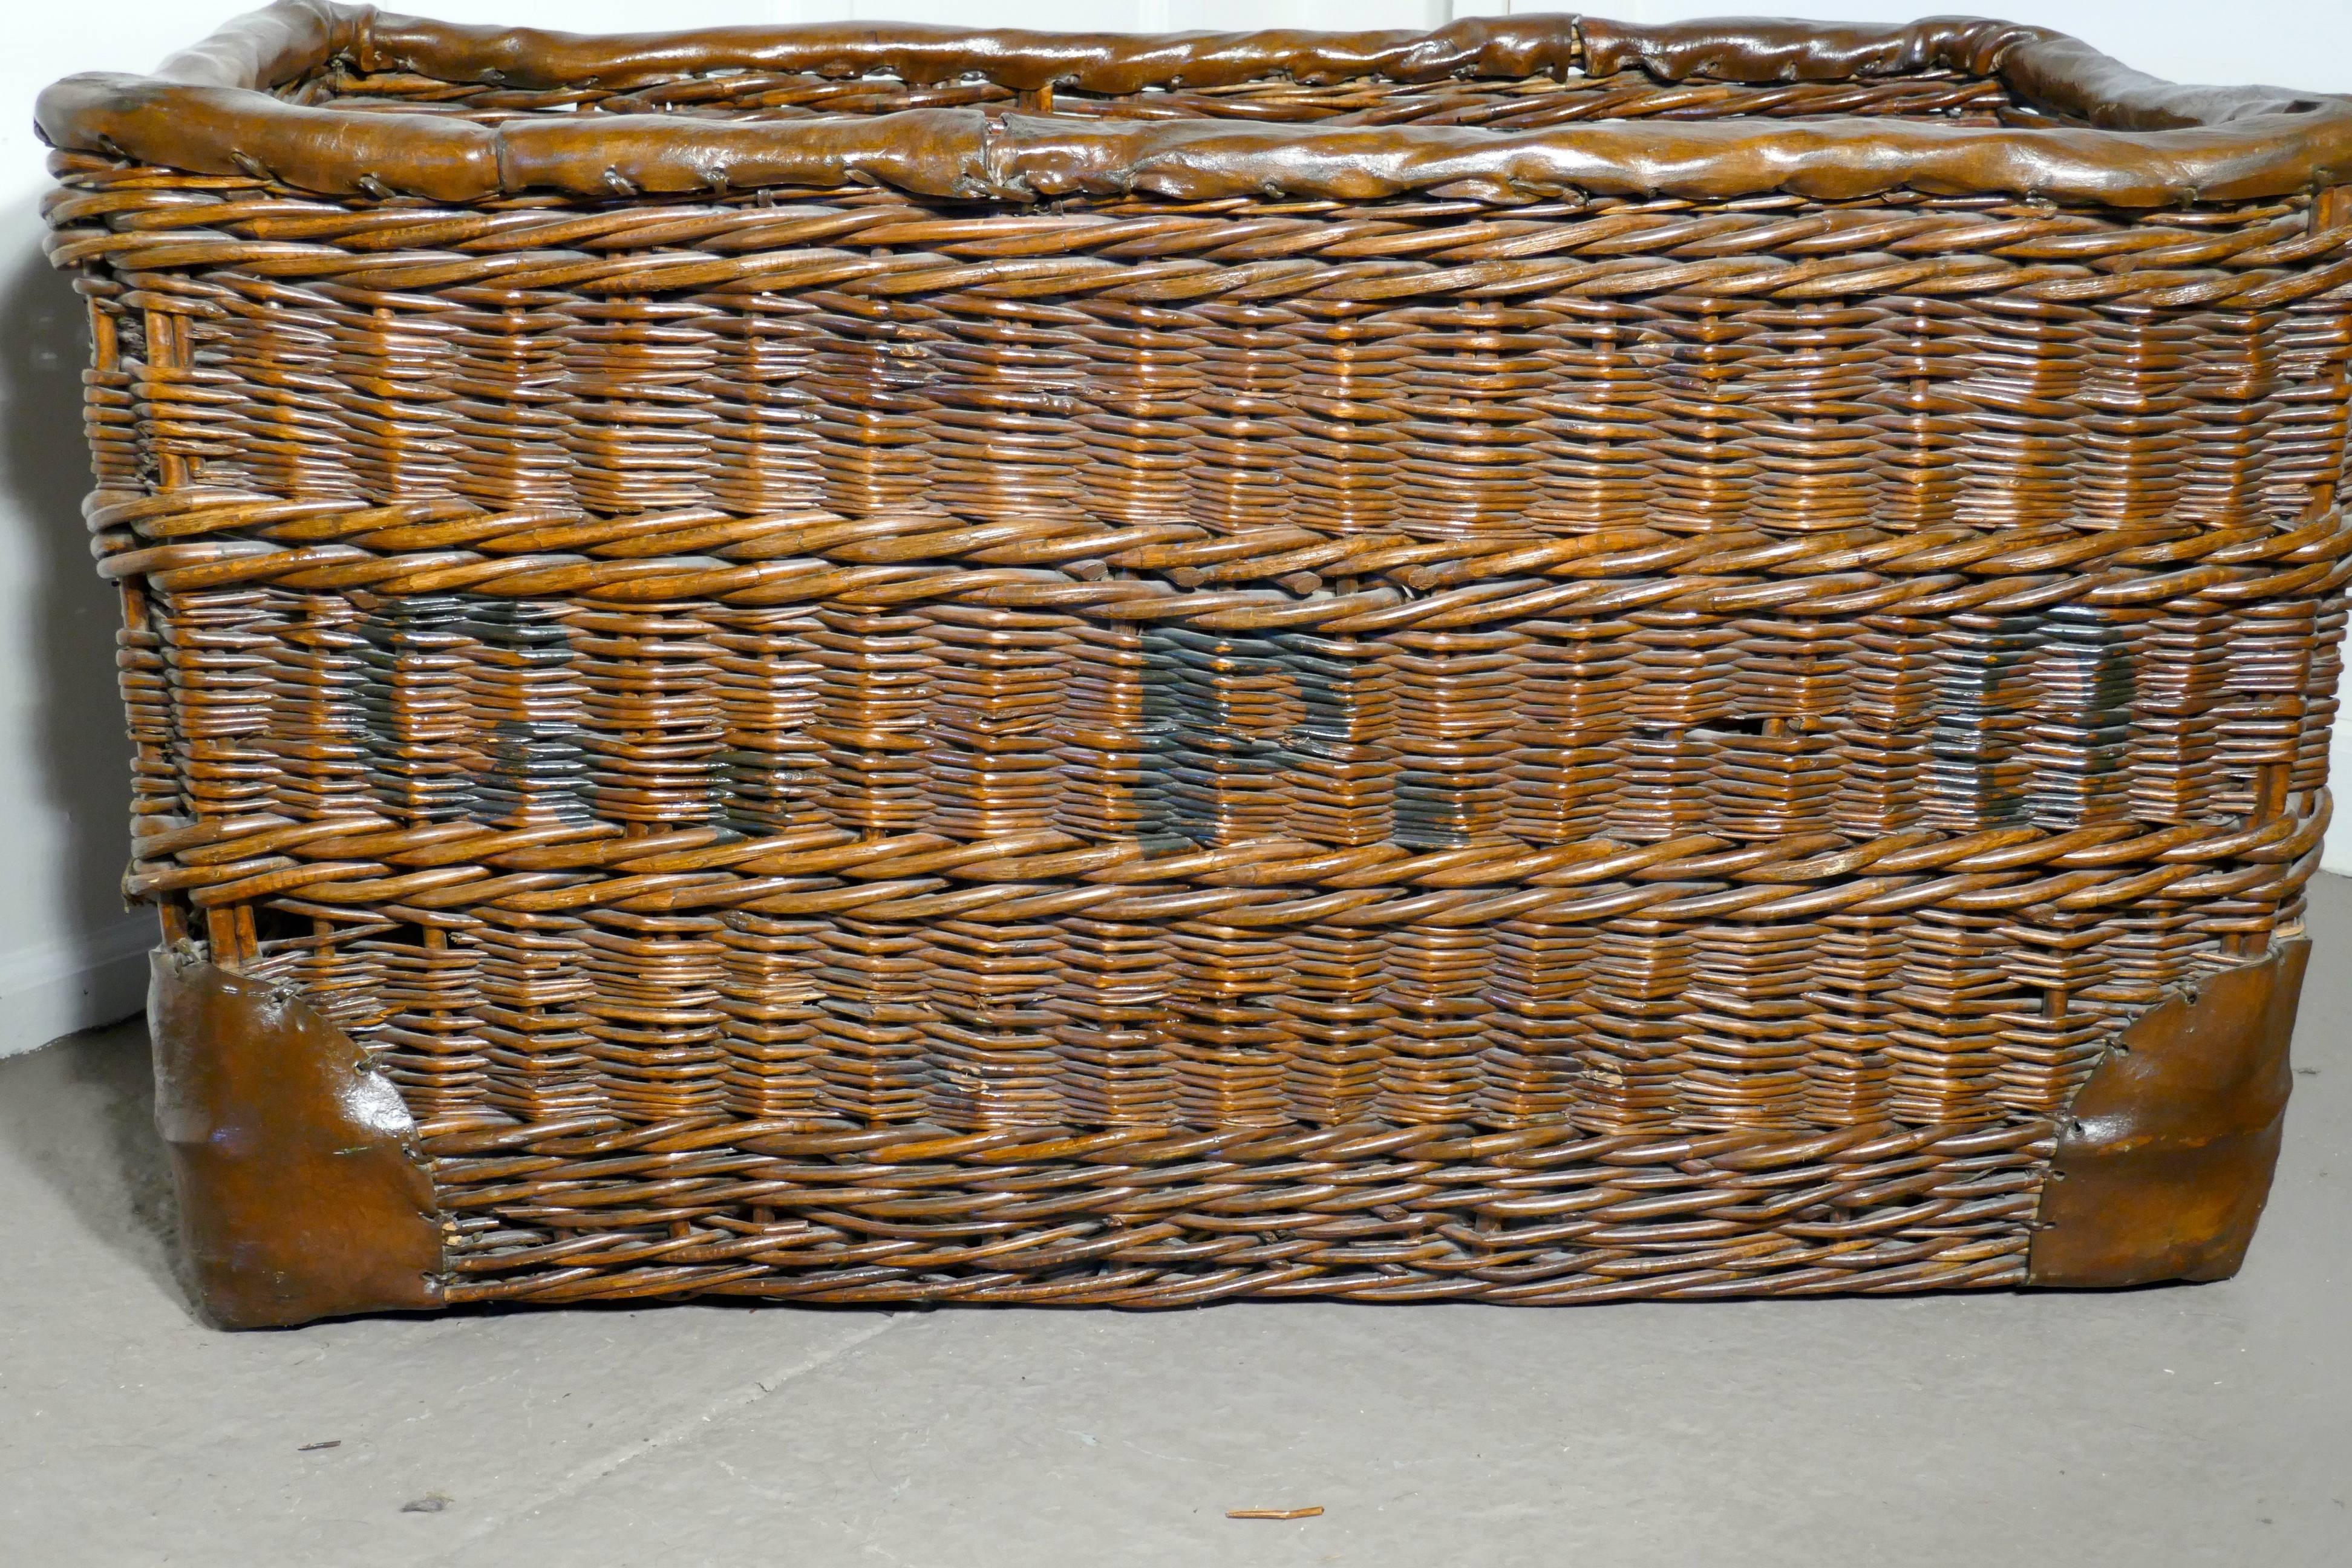 Edwardian G.P.O. wicker post or mail basket.


A lovely big basket, no longer required by our National Postal Company the G.P.O. ( General Post Office) as is stamped on both sides

This large strong basket has a strengthening vellum covered top